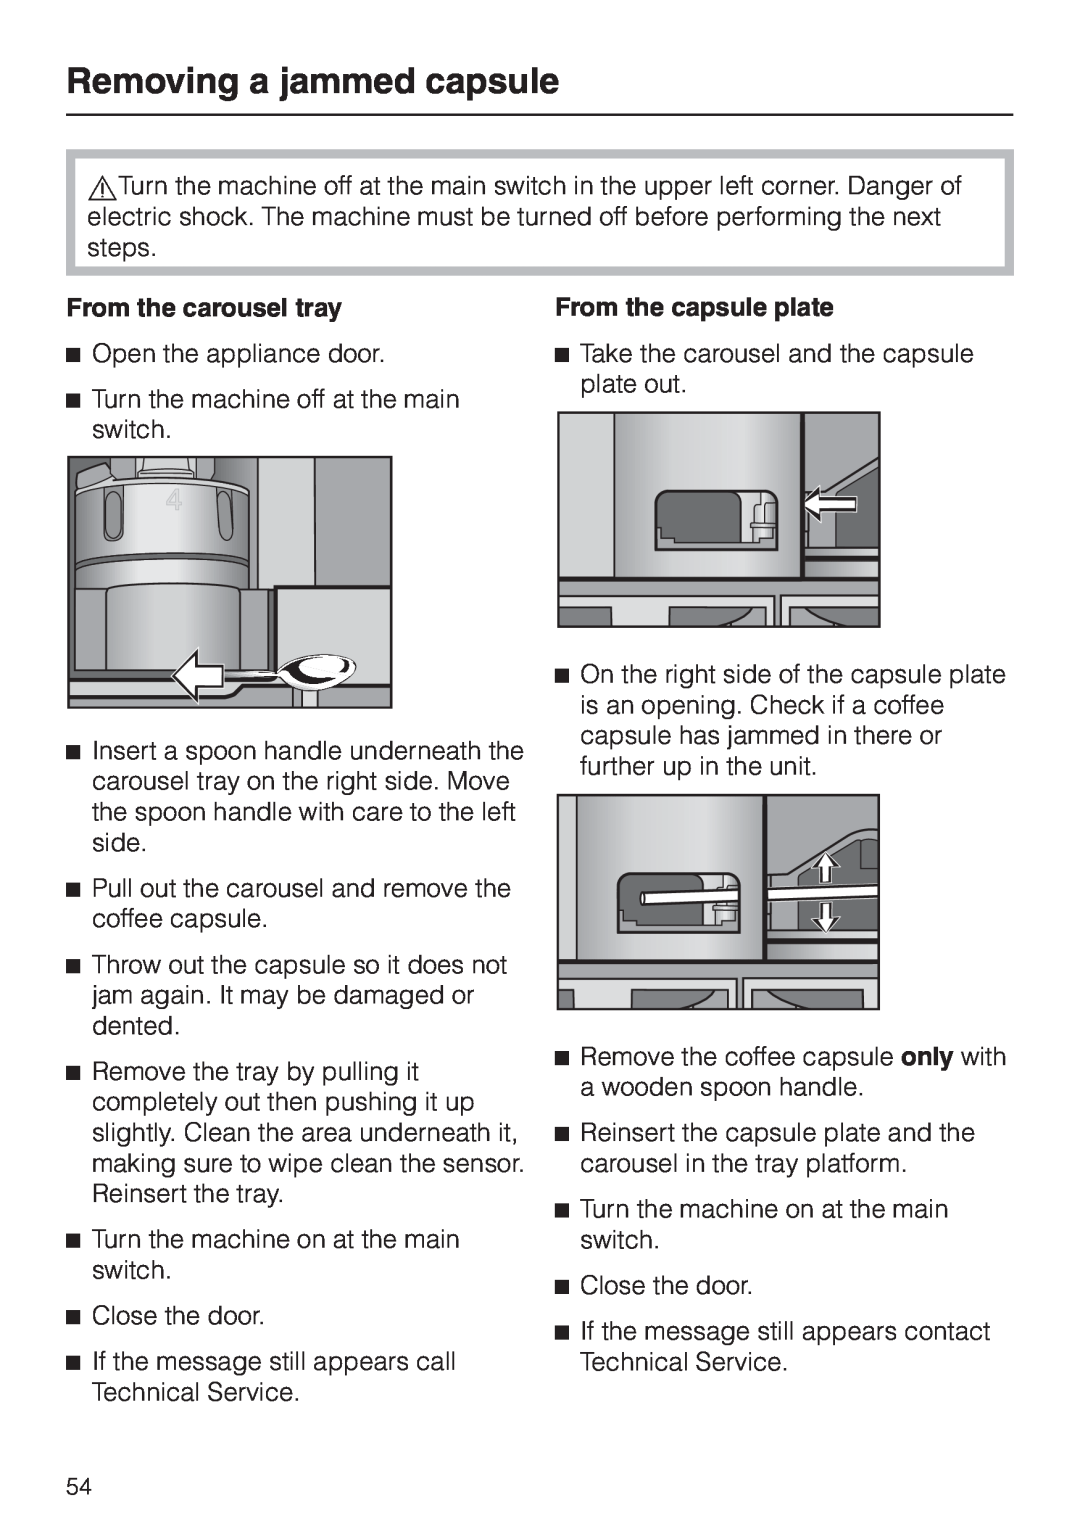 Miele CVA 2650 operating instructions Removing a jammed capsule, From the carousel tray, From the capsule plate 